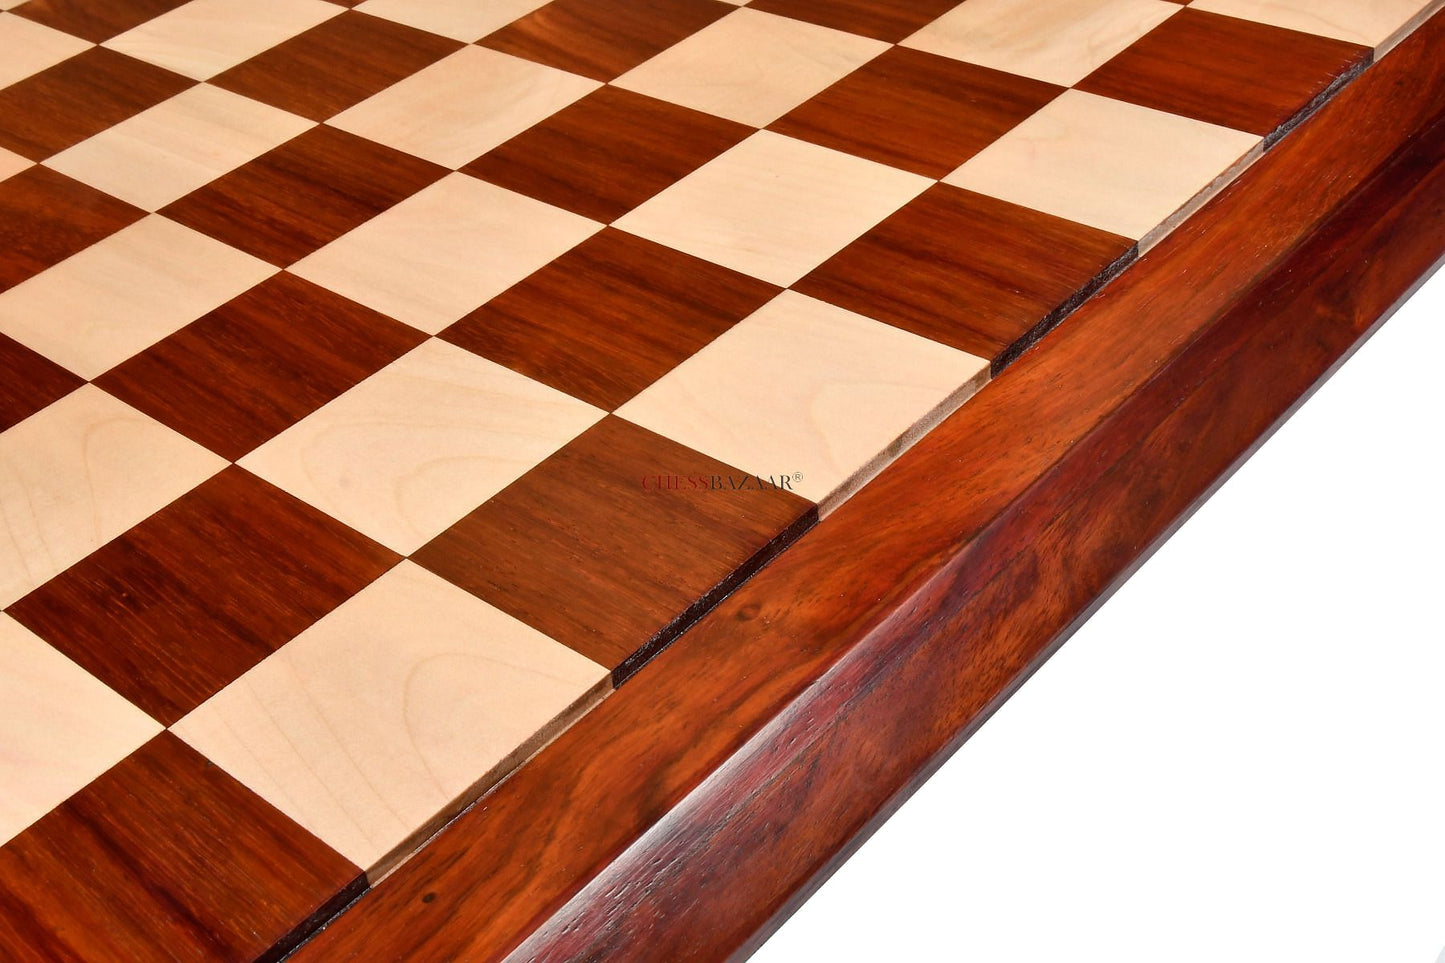 Deluxe Bud Rosewood / Maple Wooden Chess Board 23" - 60 mm